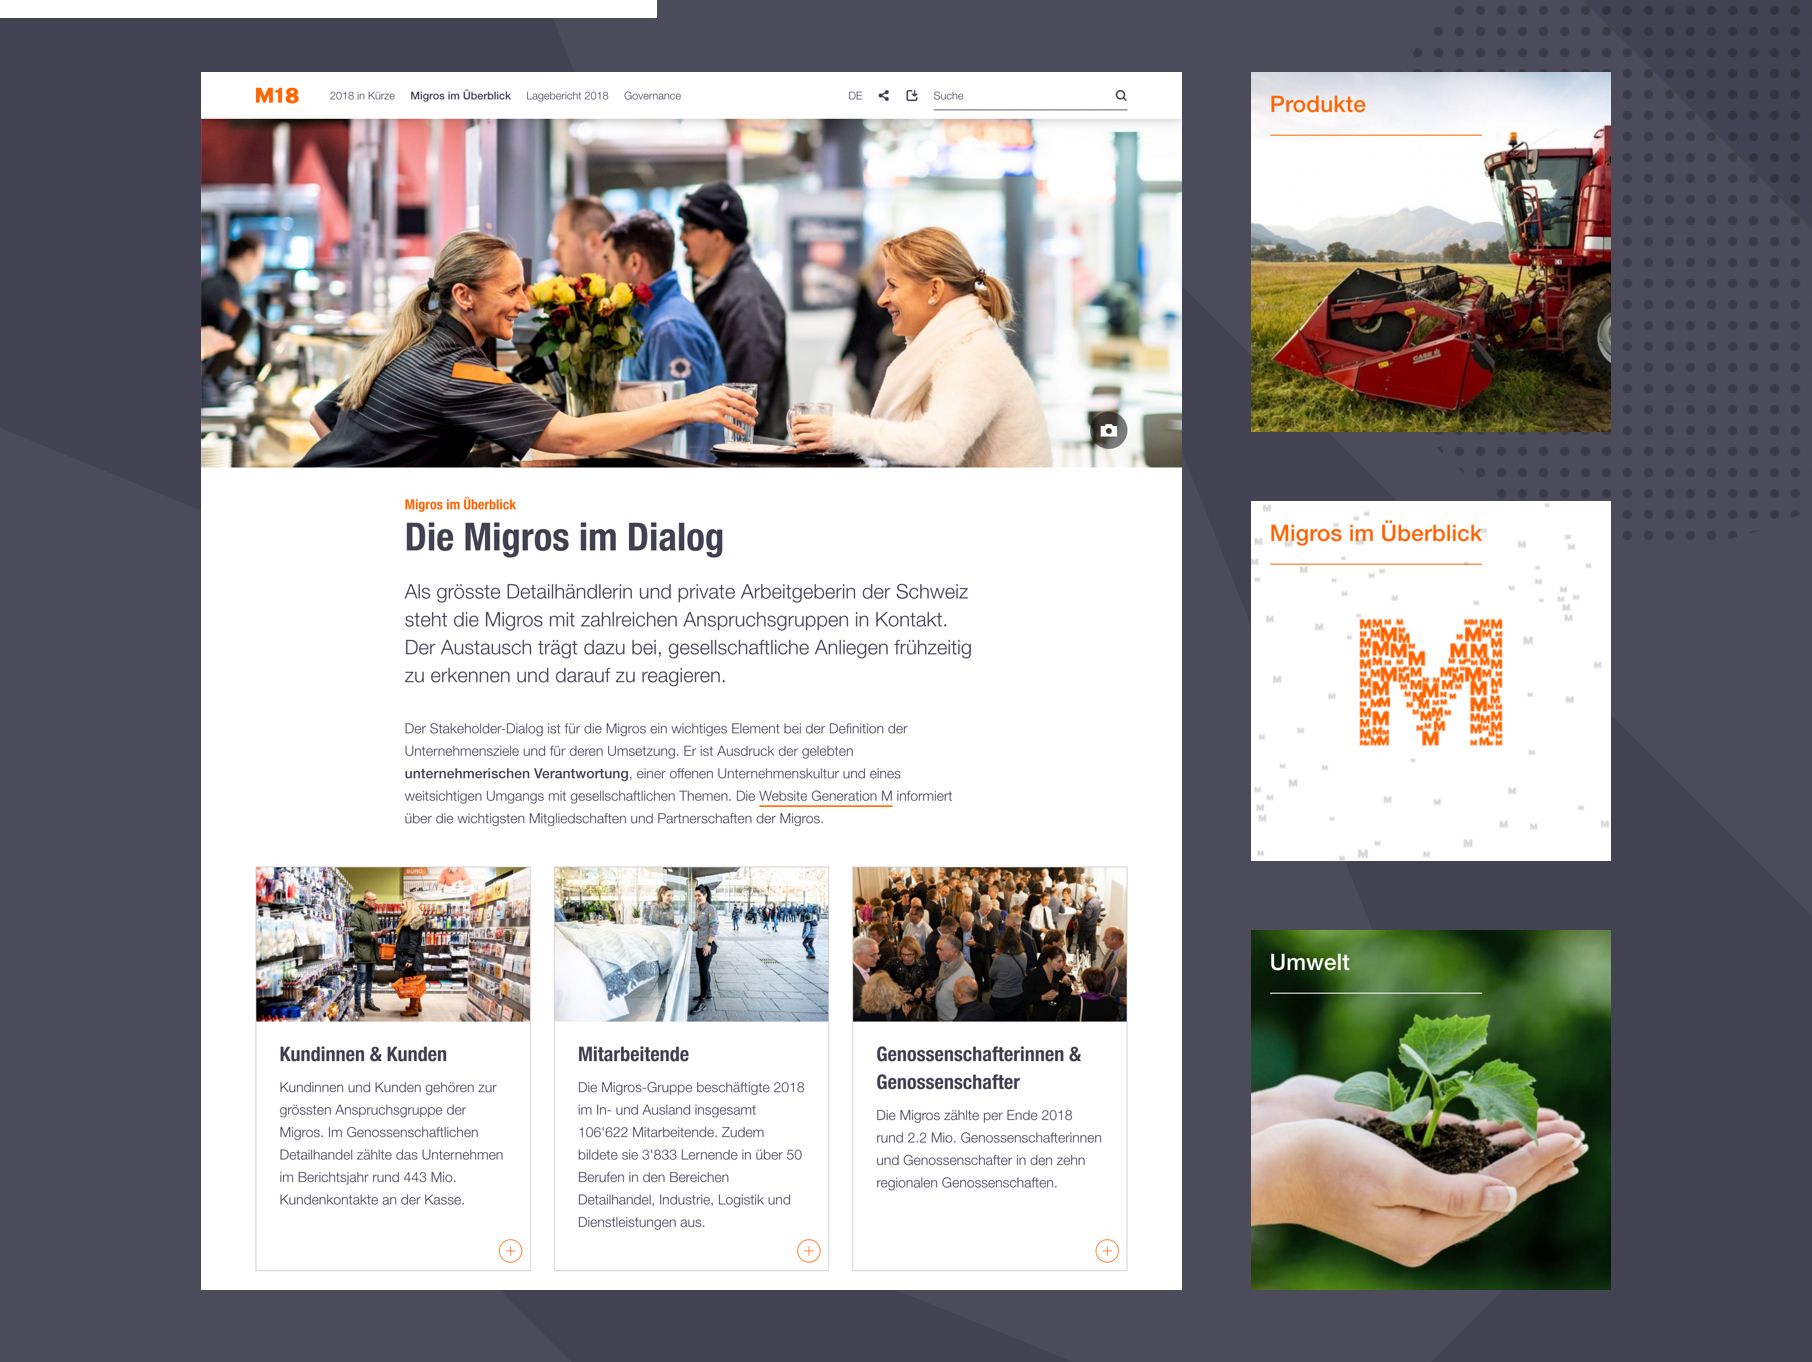 Insights into the Migros Annual Report M18, for which Merkle provided support